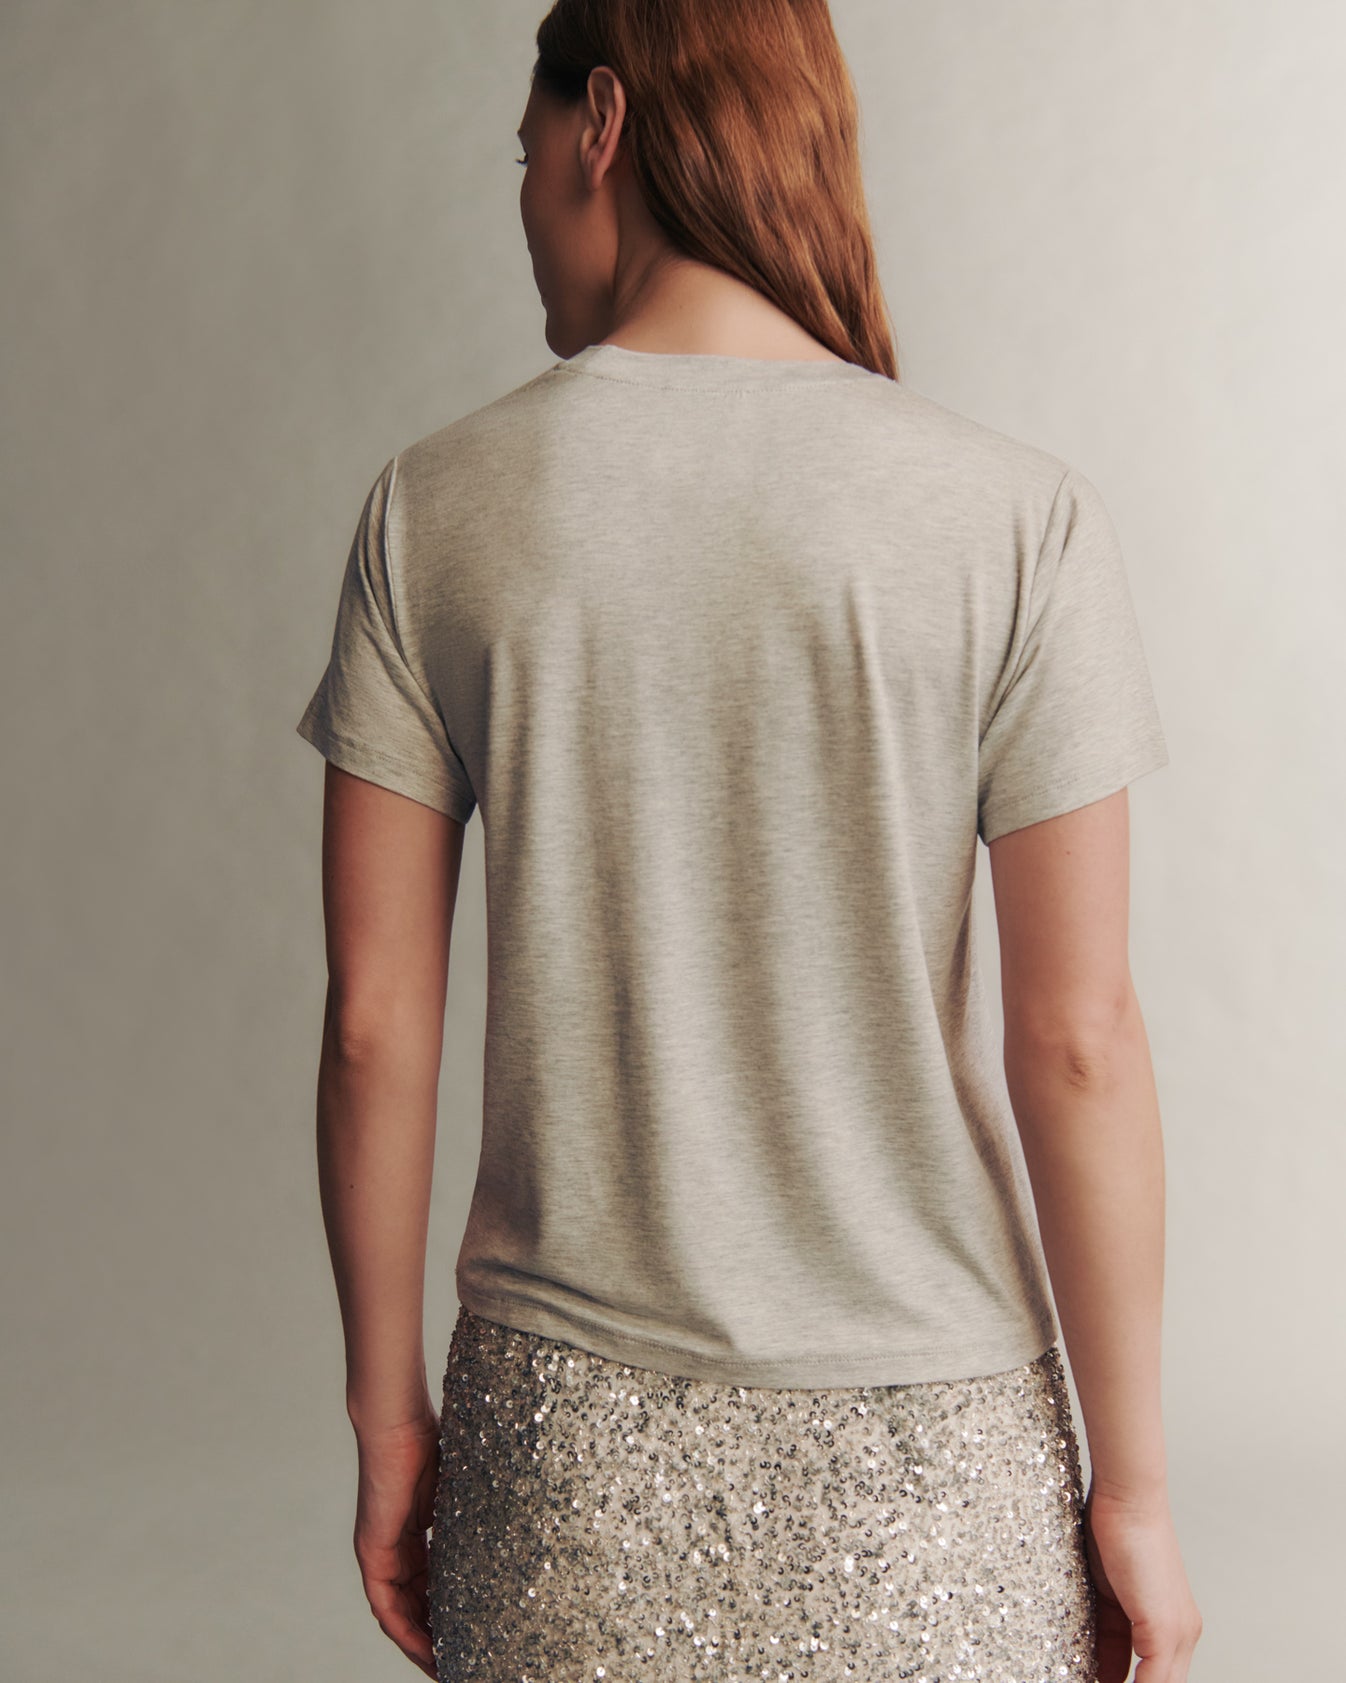 TWP Light heather grey His Tee in Jersey view 3